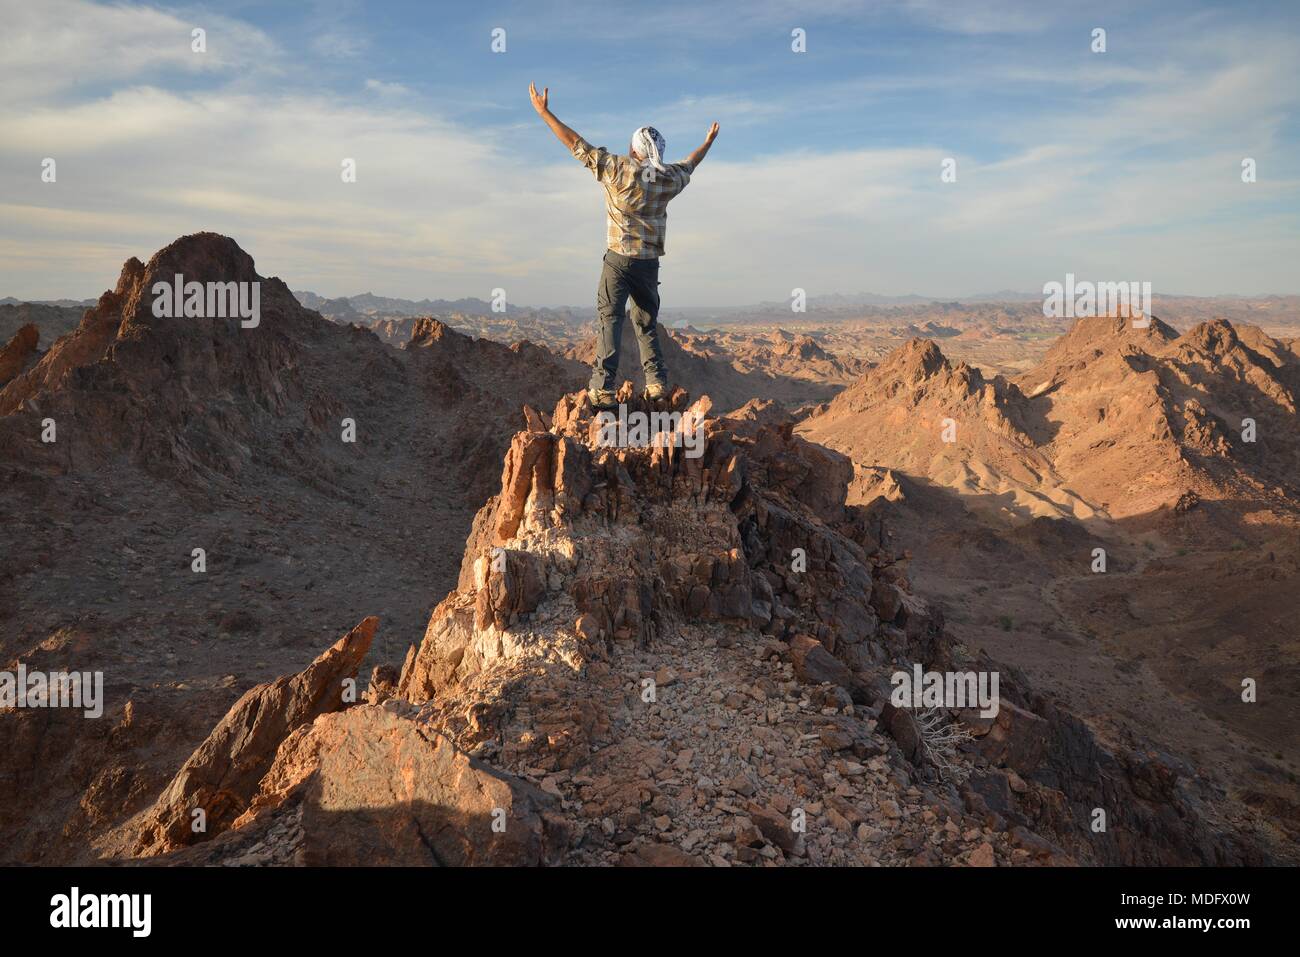 Man standing on mountain summit with his arms outstretched, Indian Pass Wilderness, California, United States Stock Photo